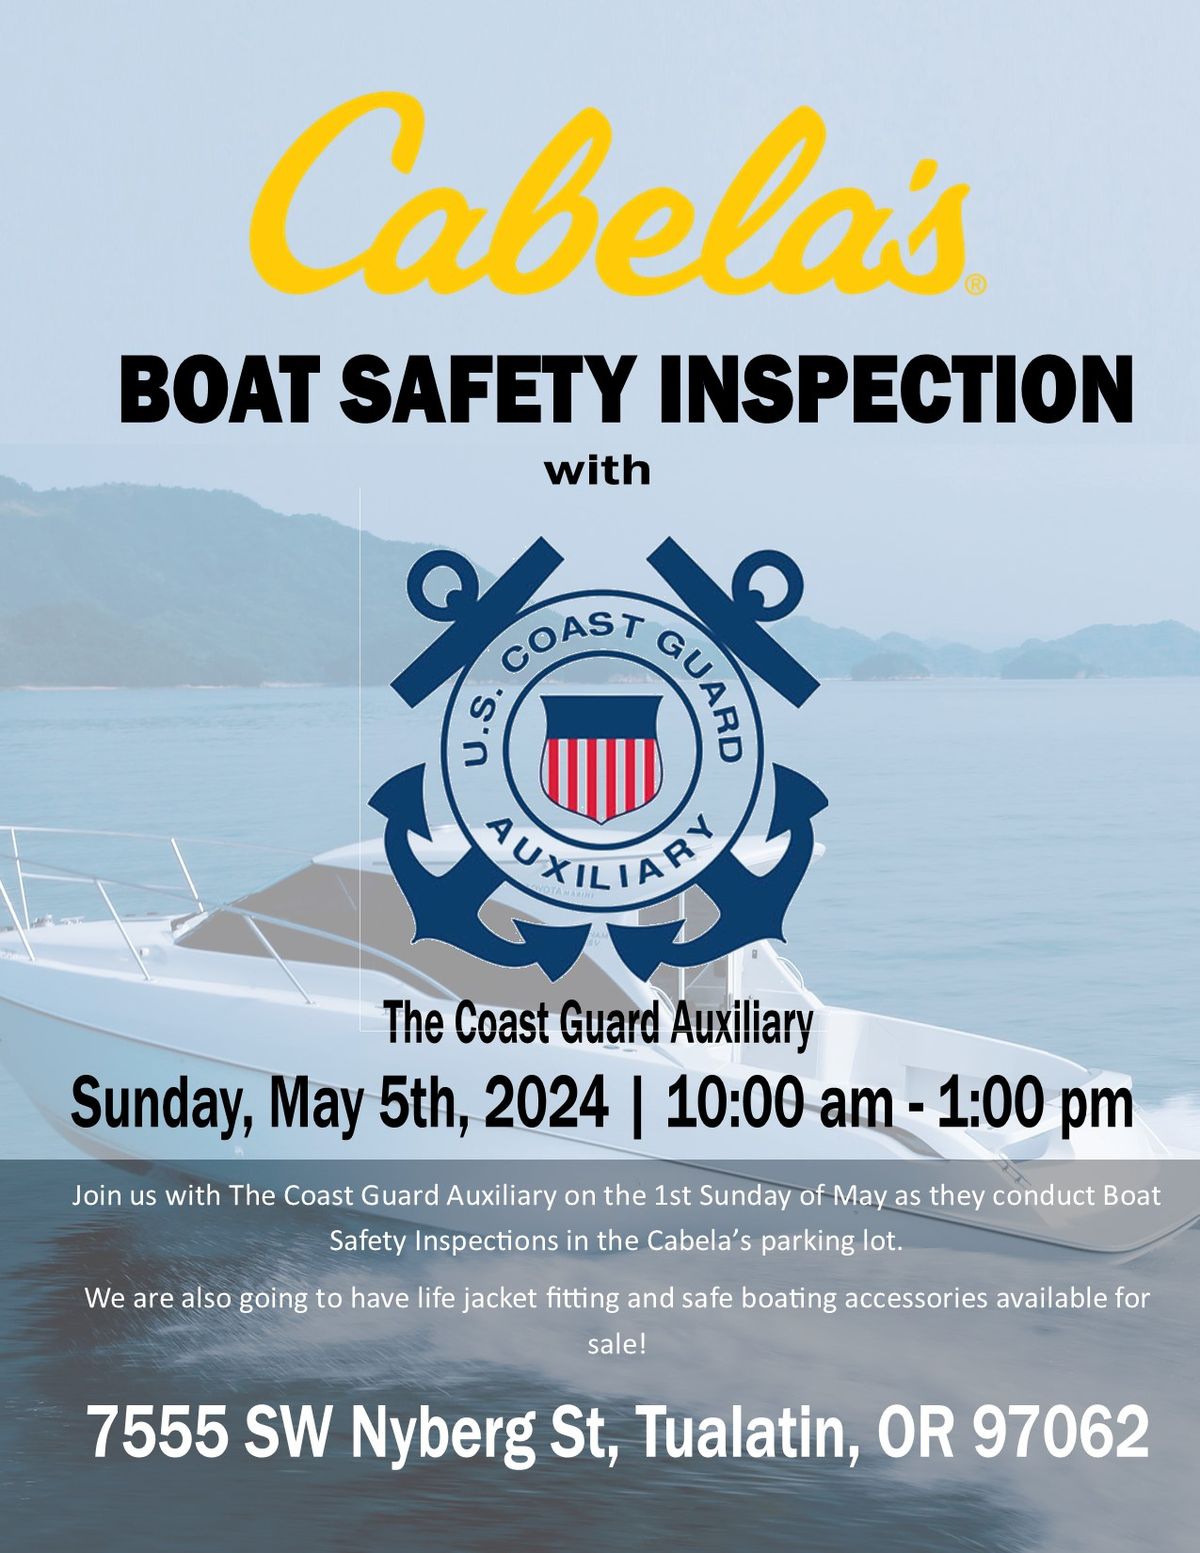 U.S. Coast Guard Auxiliary Boat Safety Inspection